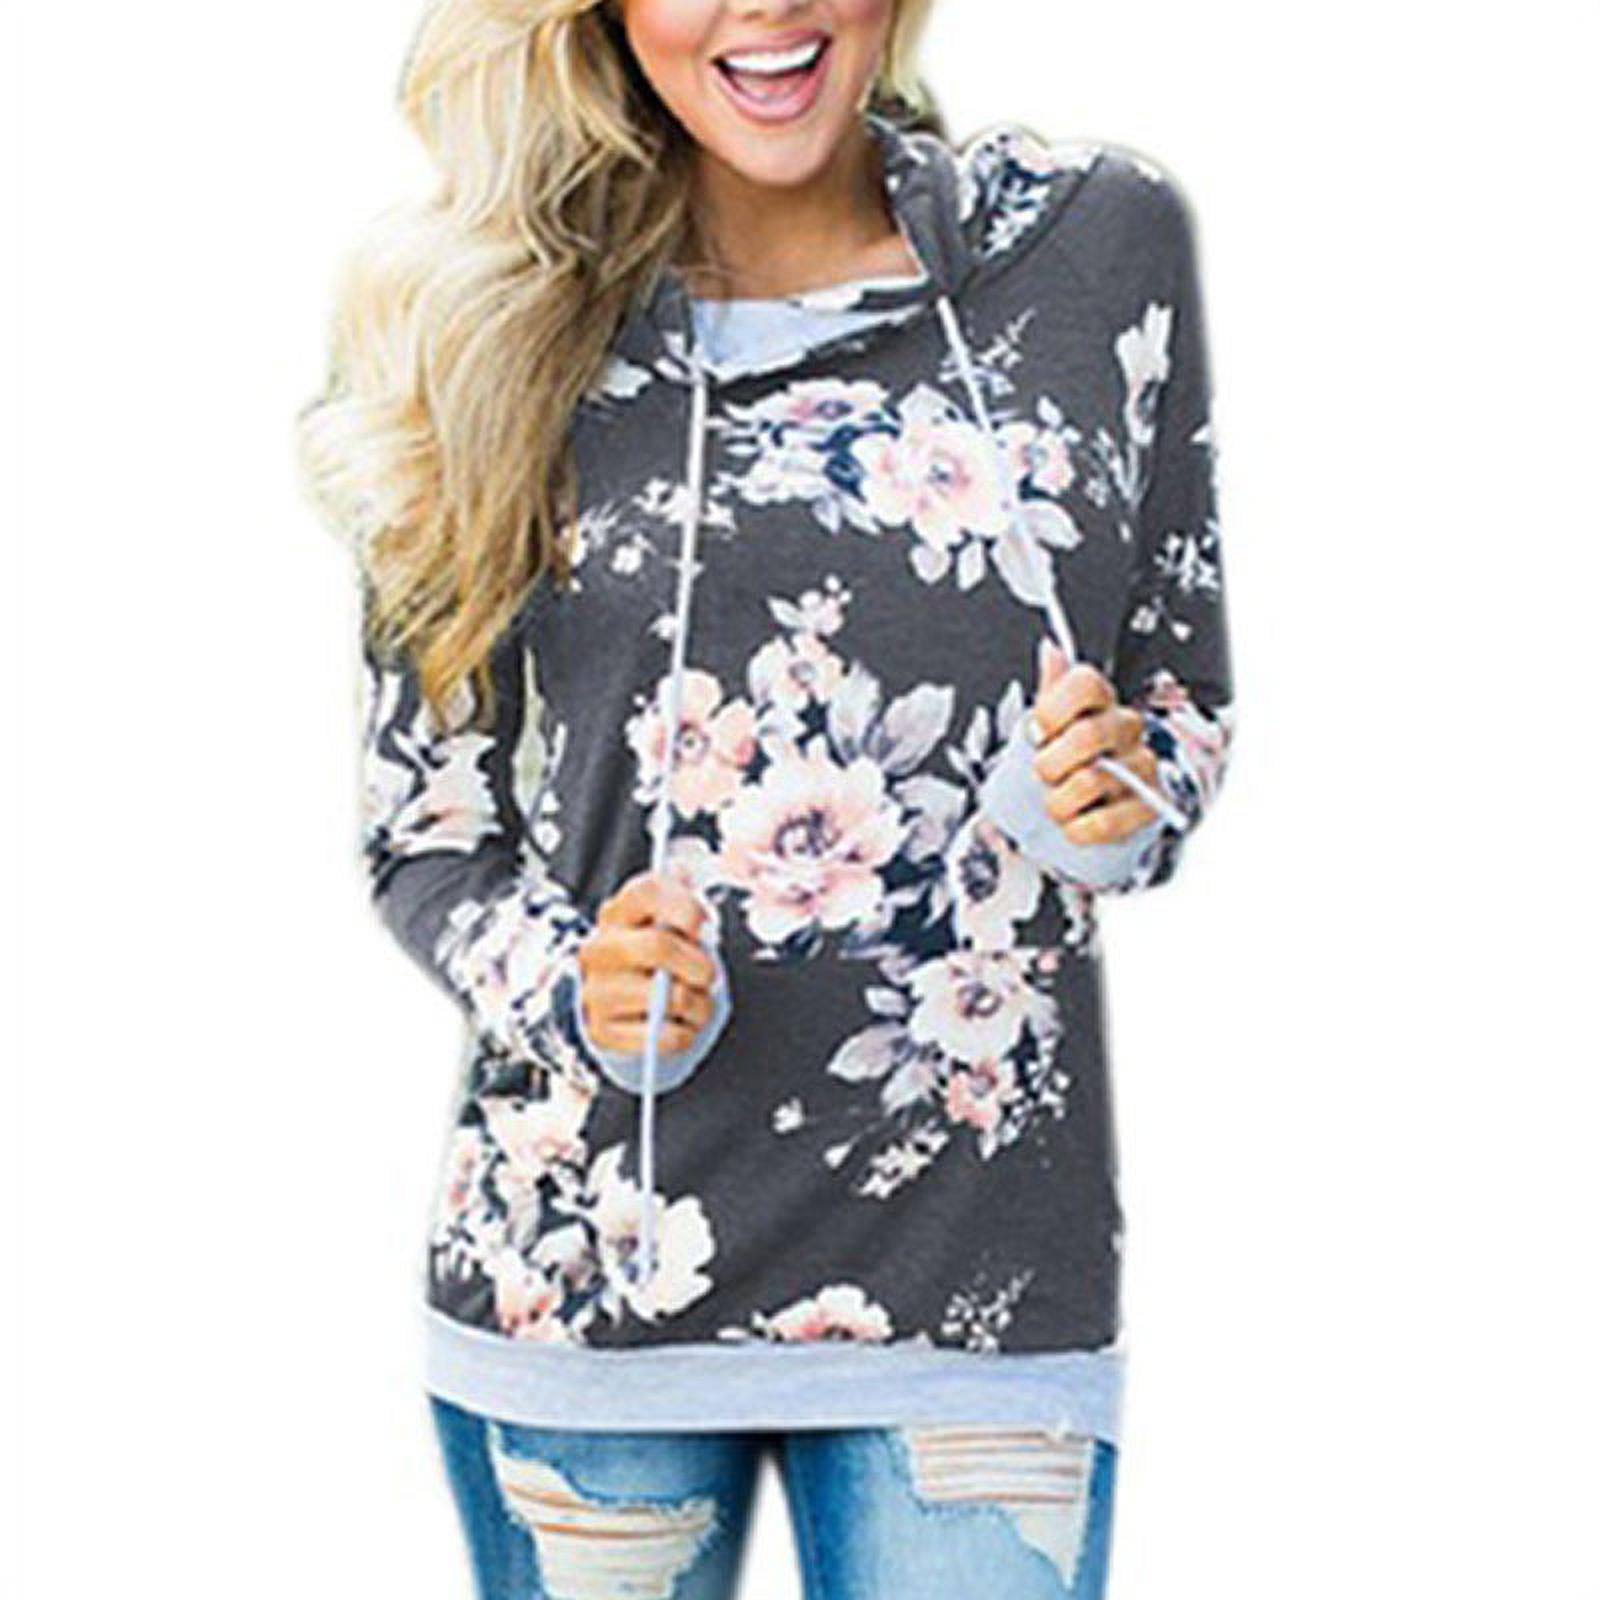 TOMIN Womens Flower Print Hoodies Pullovers For Womens Casual Tops Sweatshirt Plus Size Outwear Teen Girls Blouses